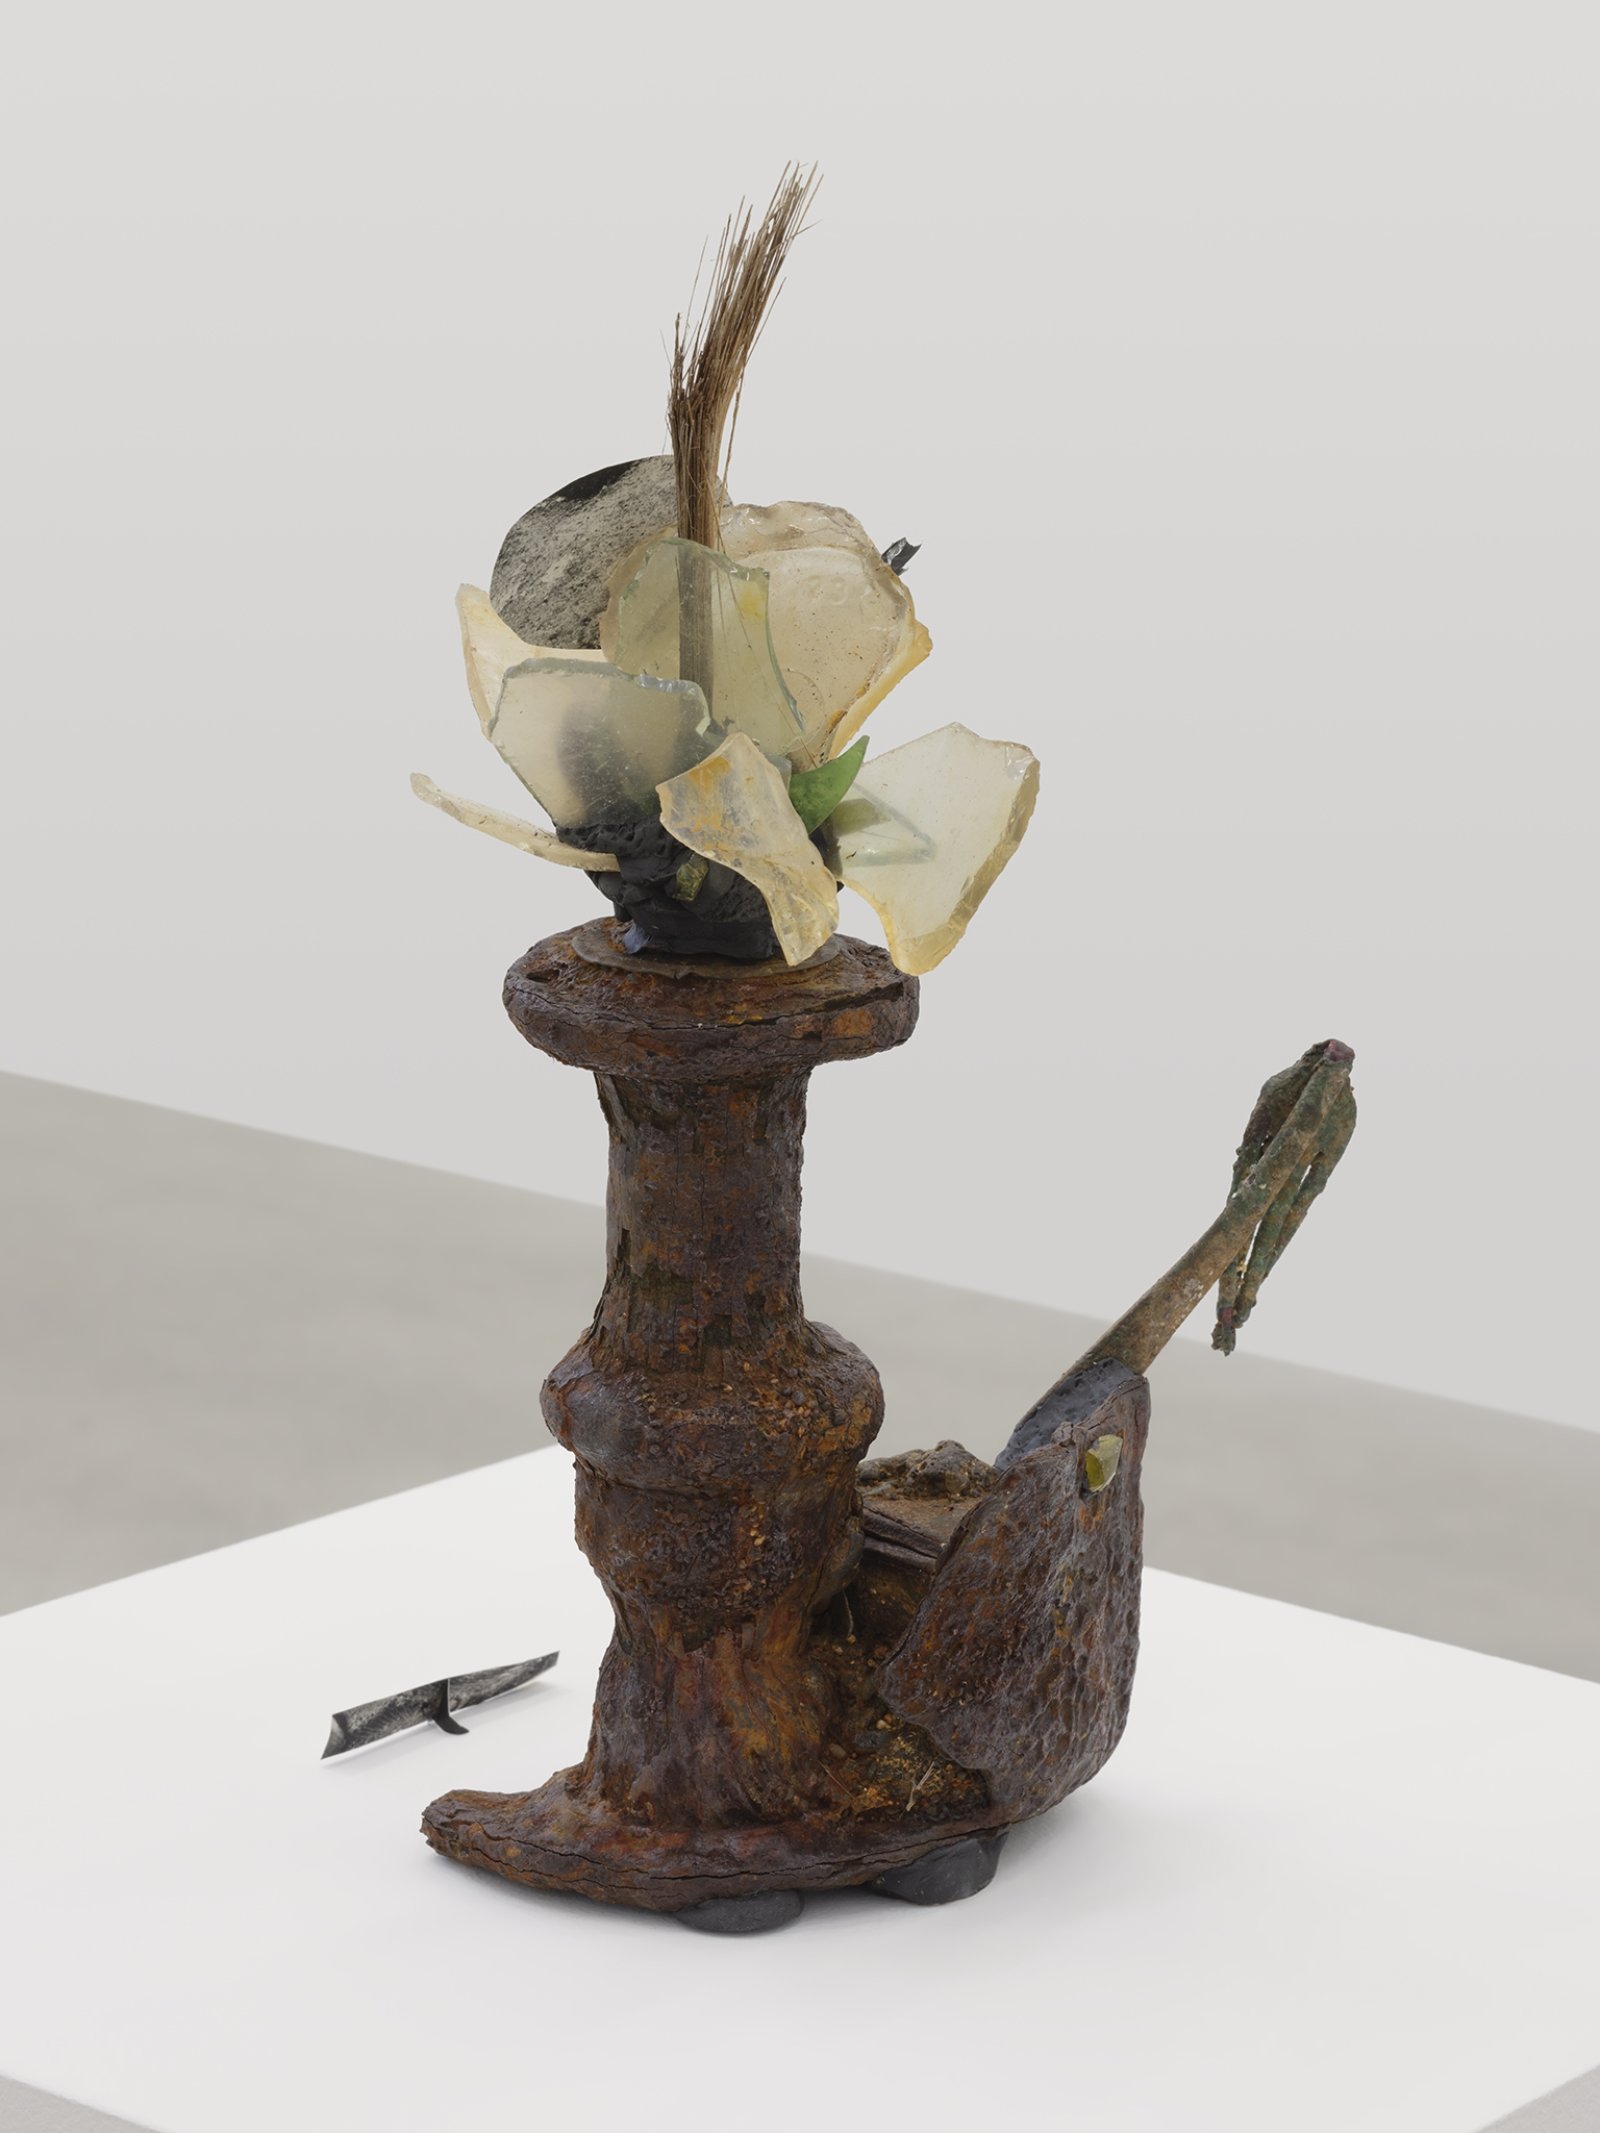 Geoffrey Farmer, Seven Pounds of Red Meat, 2019, metal, glass, coconut, paper, 14 x 9 x 6 in. (36 x 23 x 15 cm)